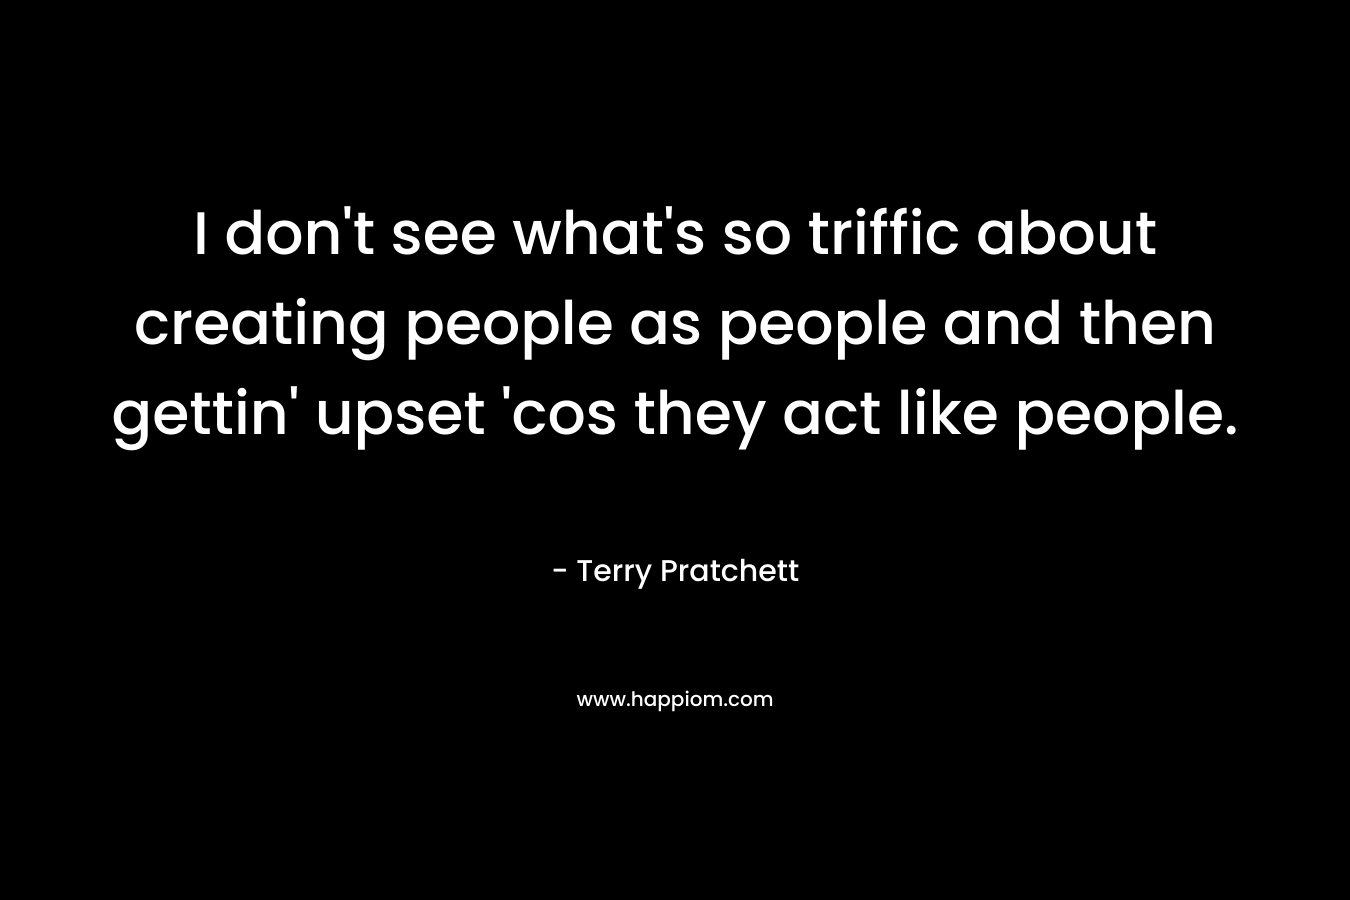 I don't see what's so triffic about creating people as people and then gettin' upset 'cos they act like people.